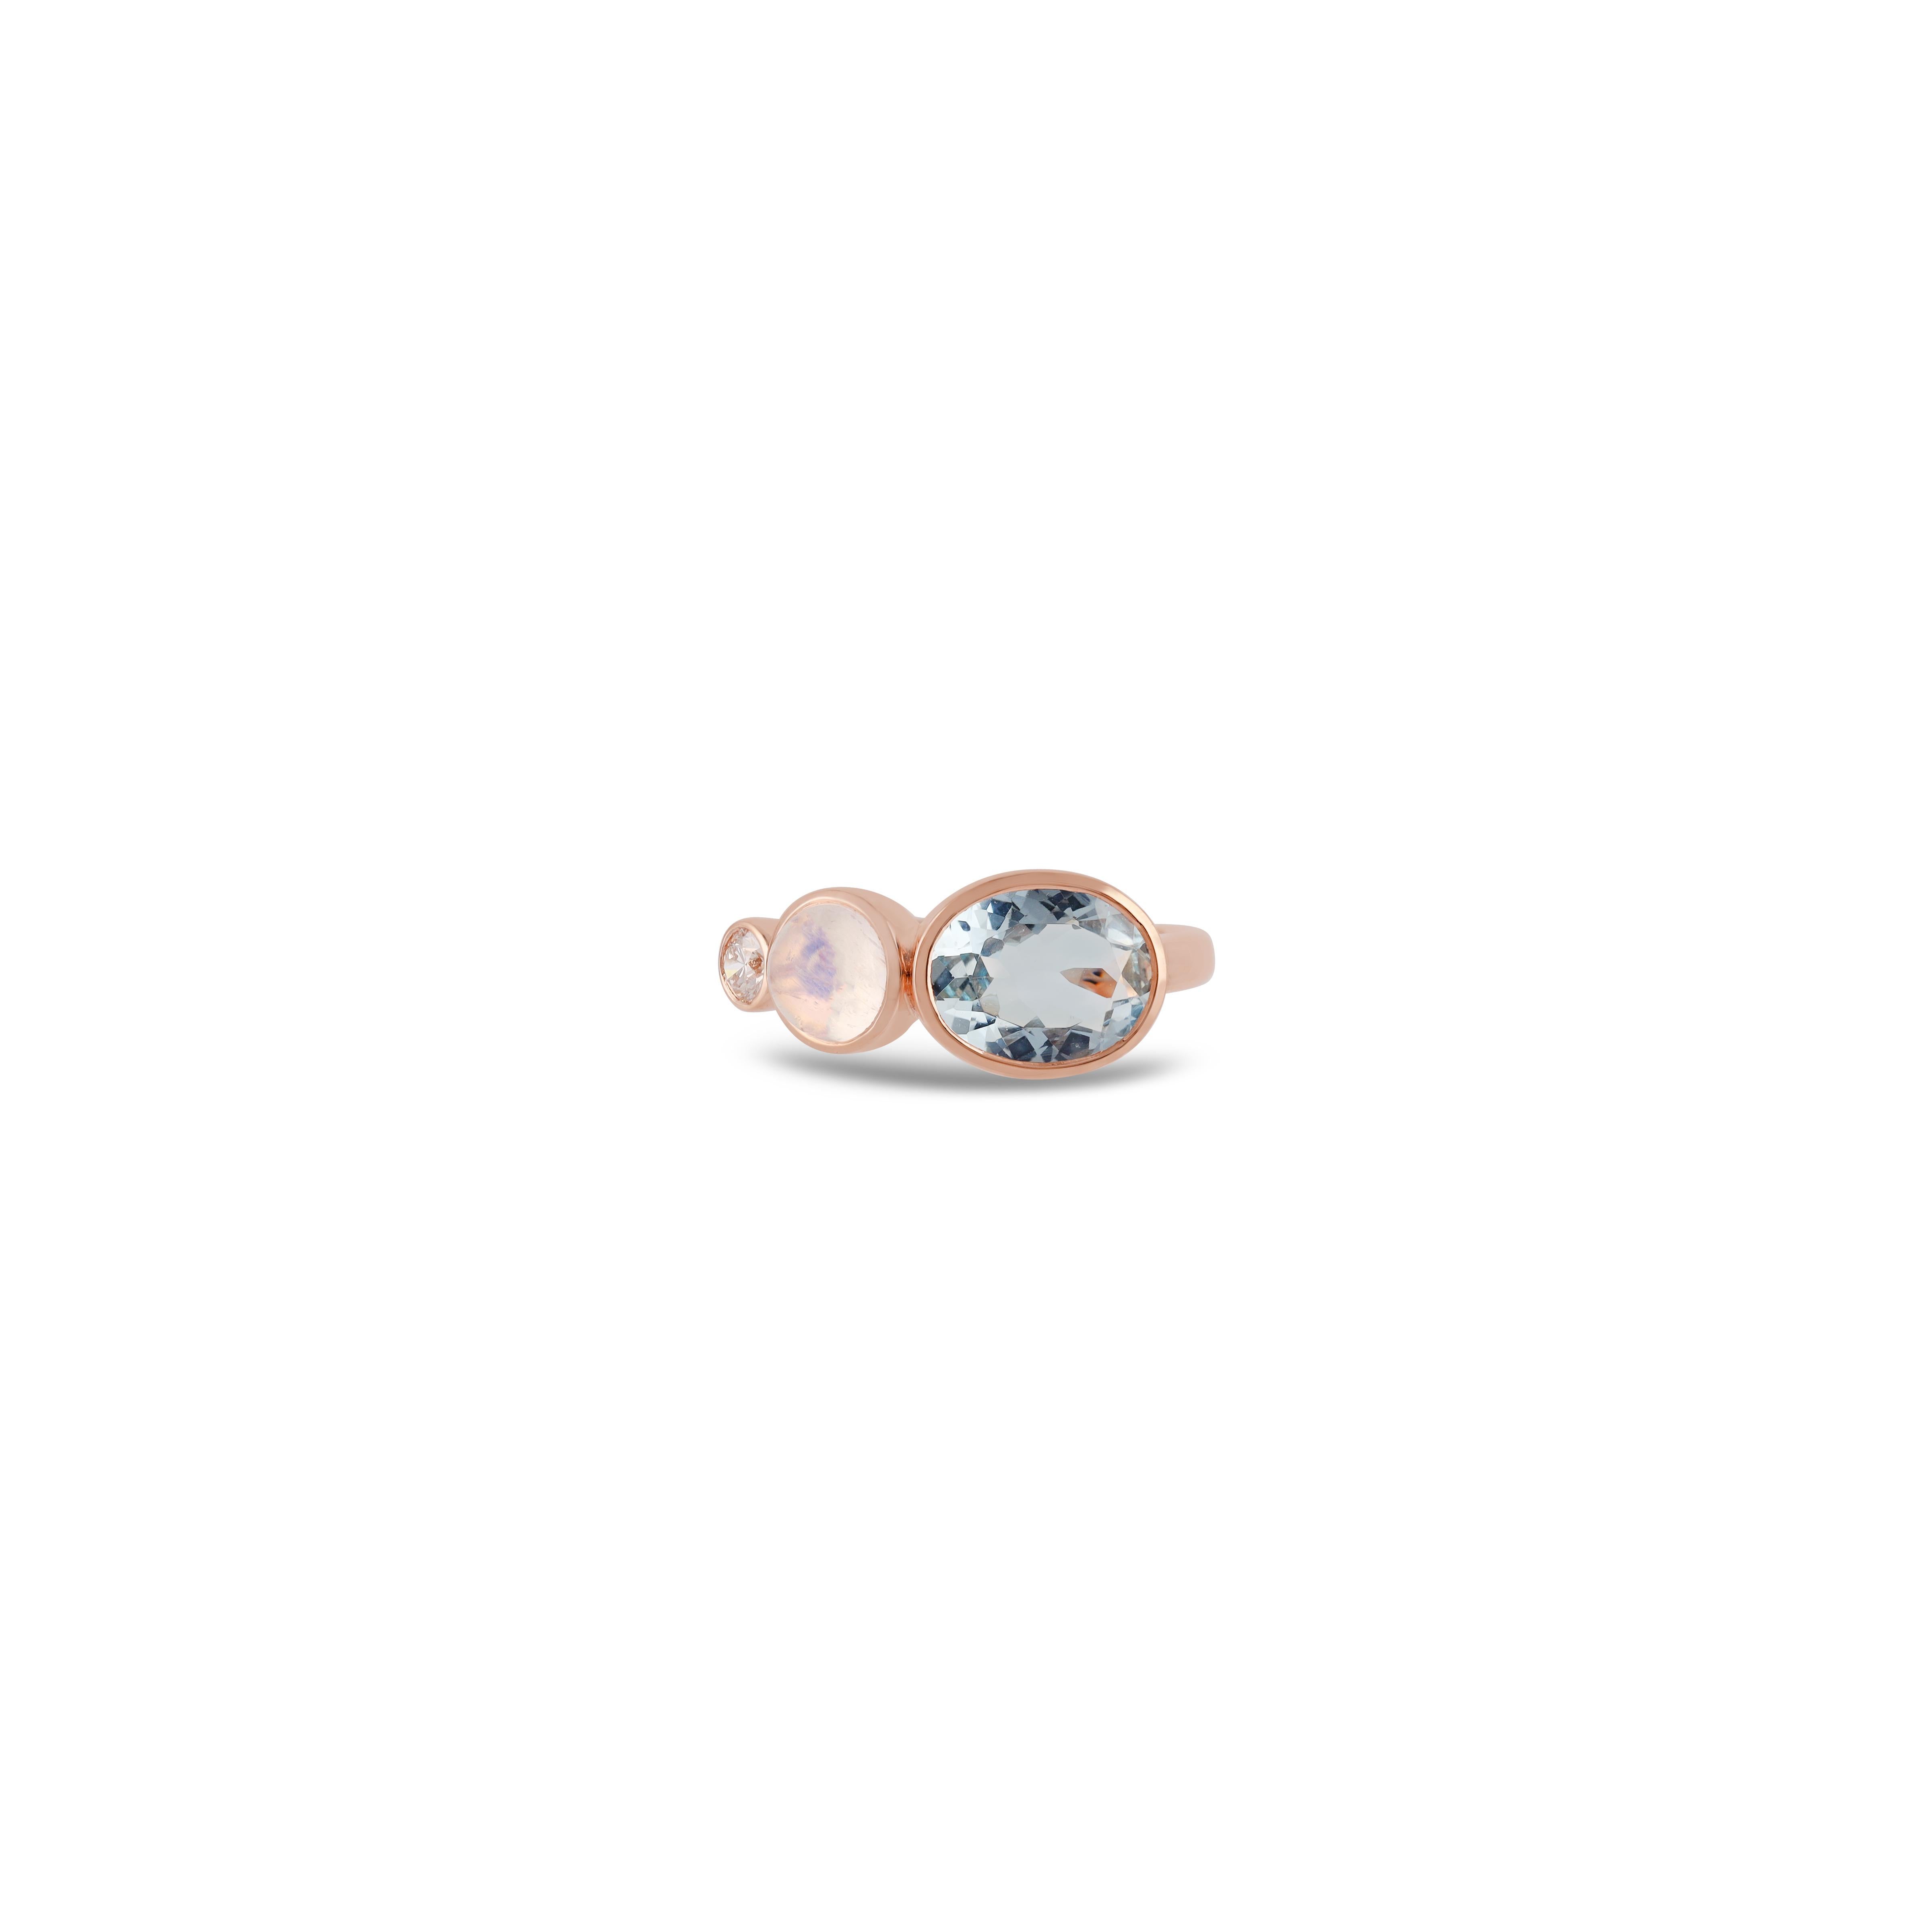 This is an elegant Aquamarine & Multi Stones ring studded in 18k Rose gold features a fine quality of Oval-shaped Aquamarine 1.87 carats with 1 Diamond 0.13 carats, Multi Stone  1.02 Carat this entire ring is made in 18k Rose gold, it is a classic